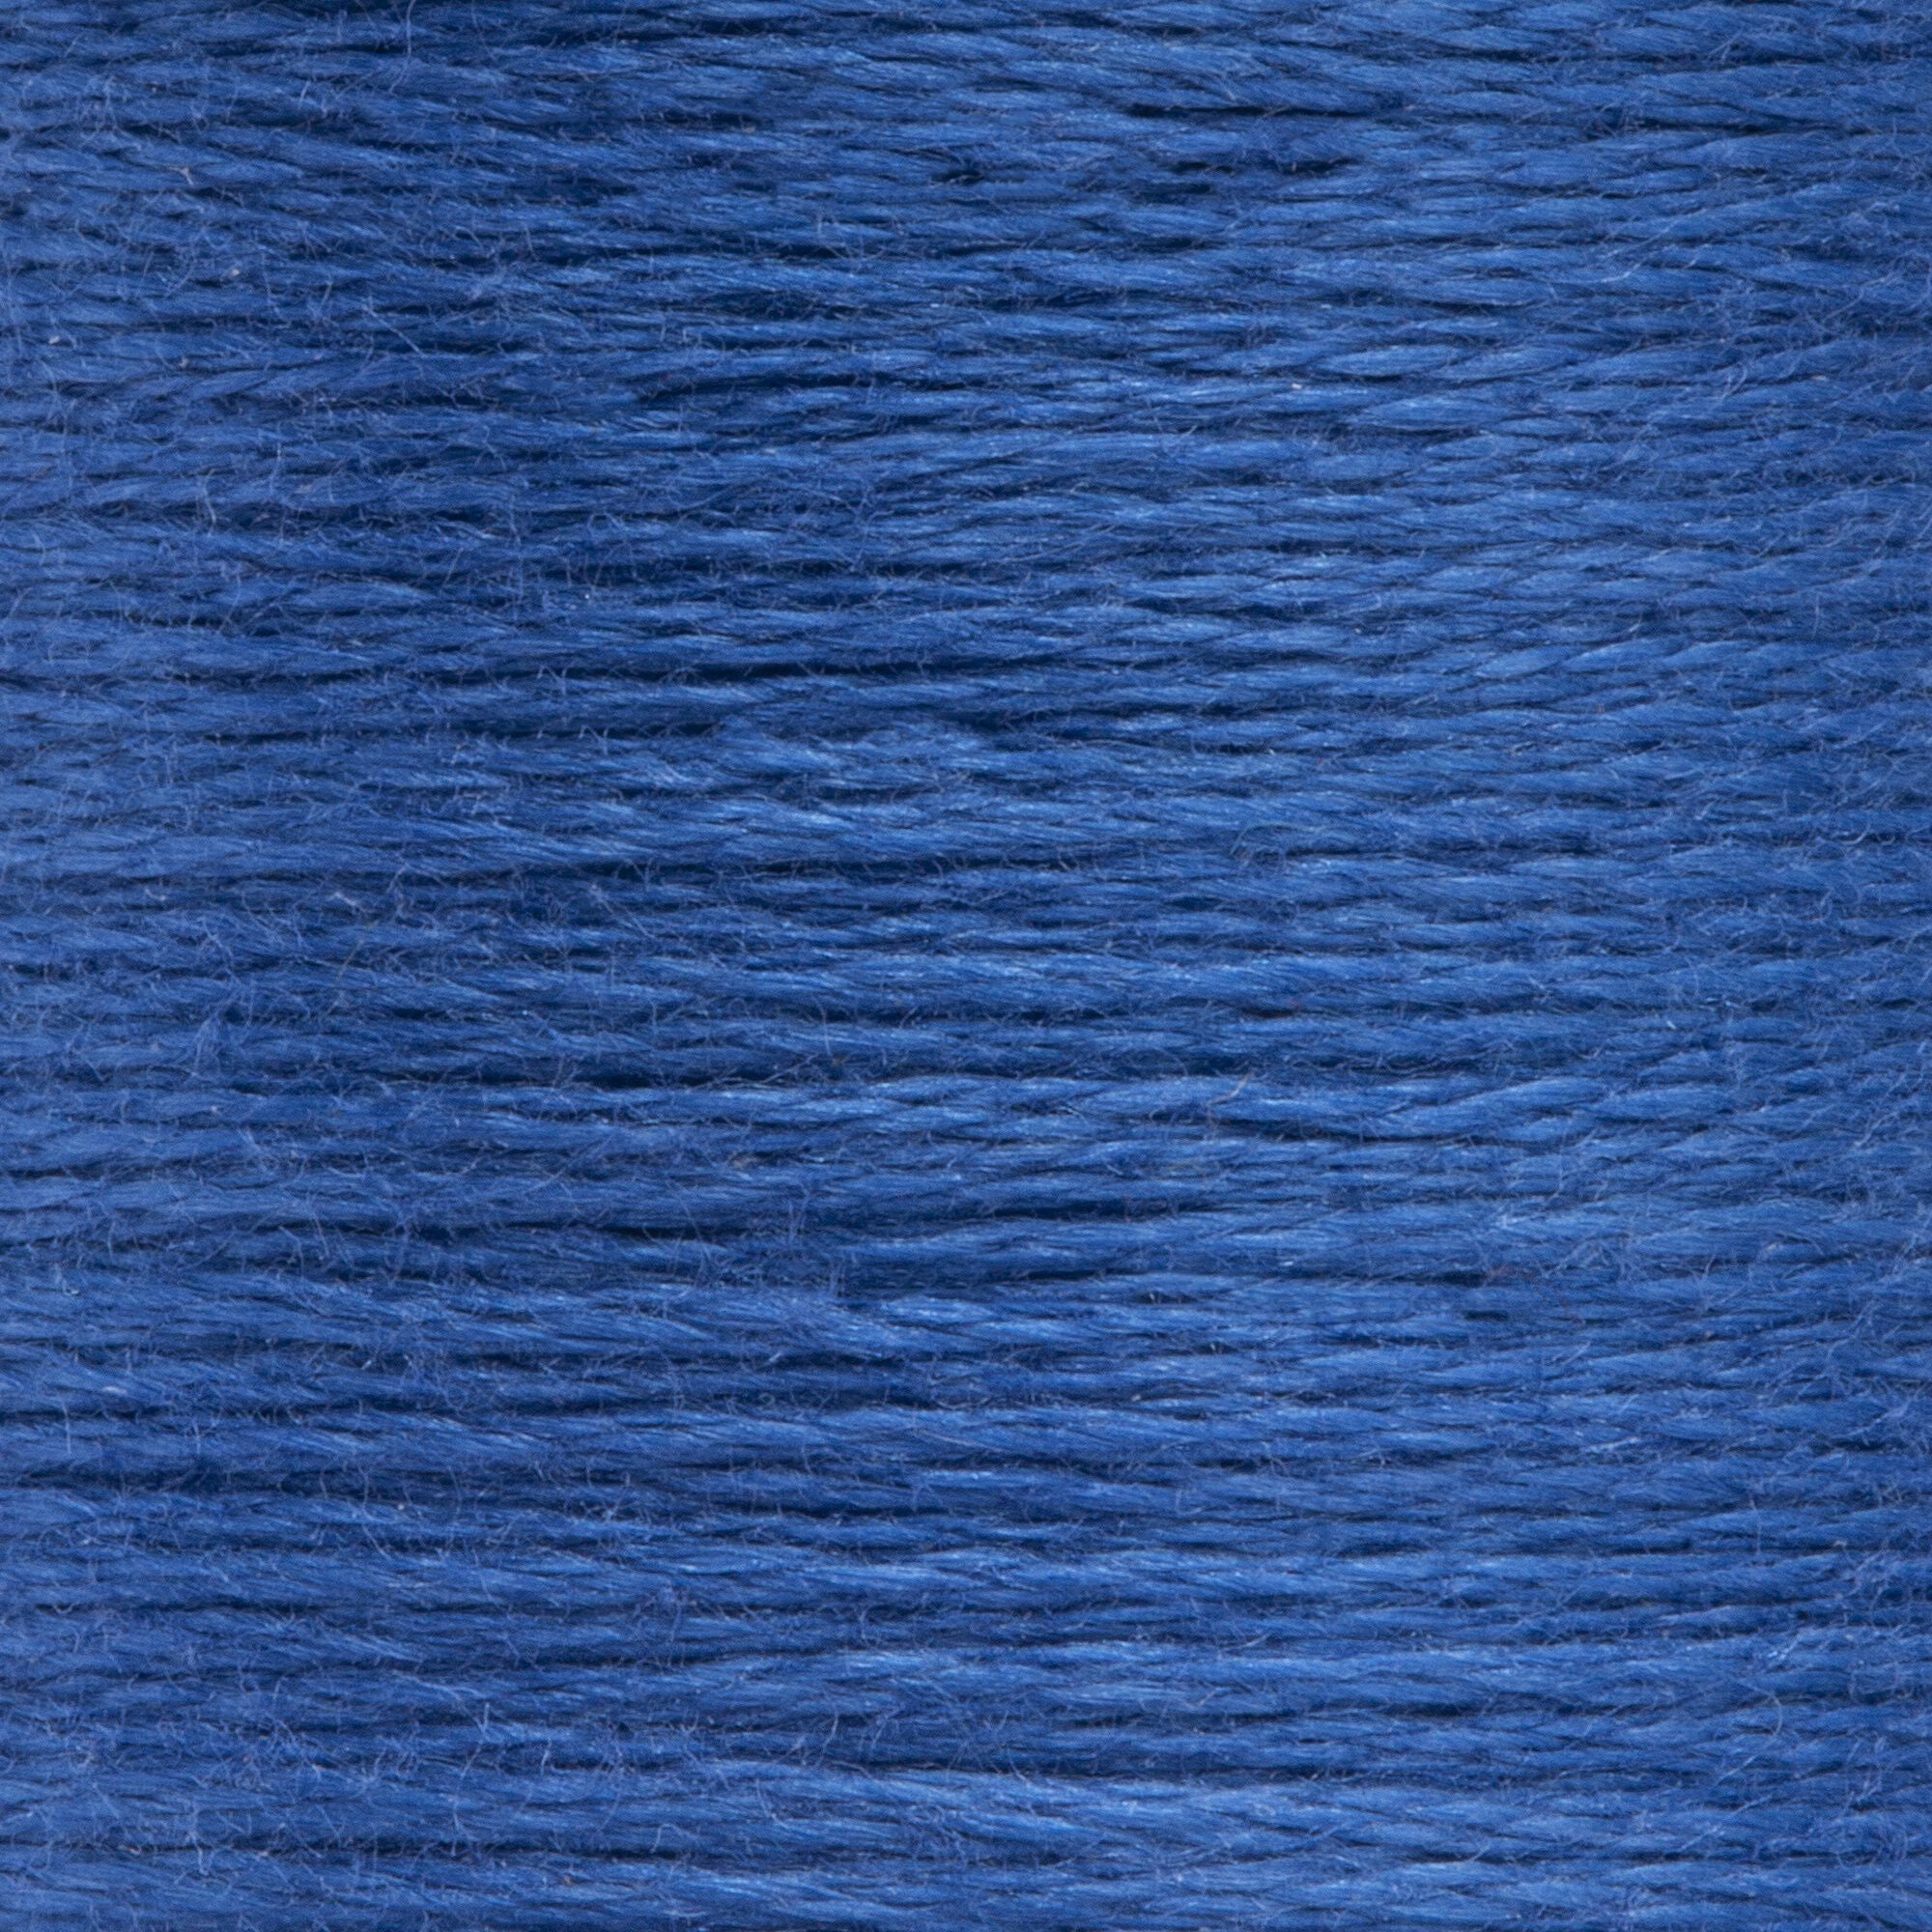 Anchor Embroidery Floss in Stormy Blue Med Dk